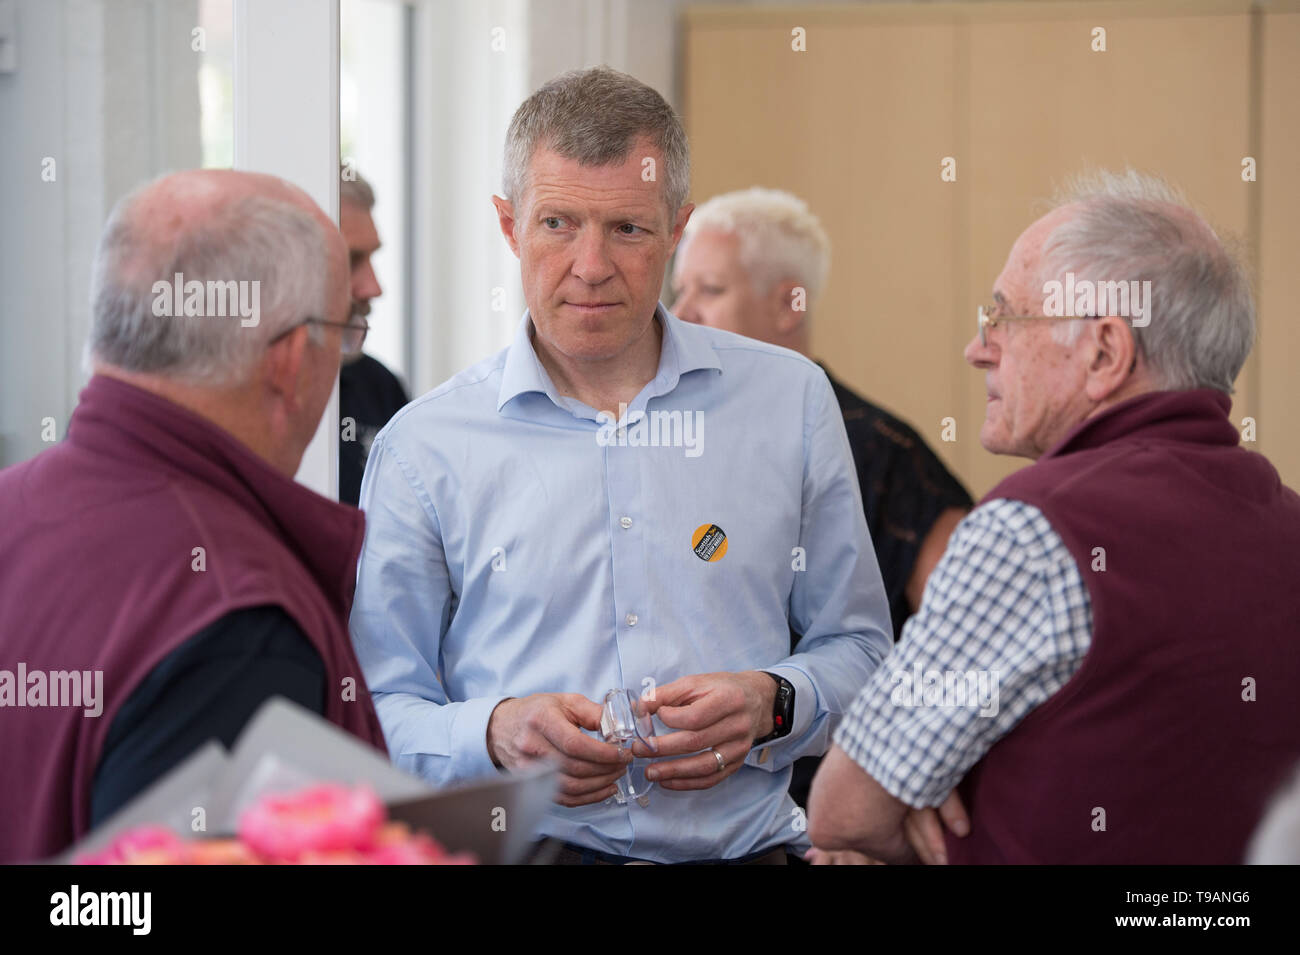 Glasgow, UK. 17 May 2019.  Pictured: Willie Rennie MSP - Leader of the Scottish Lib Dems.  During Mental Health Awareness week, Scottish Liberal Democrat Leader, Willie Rennie and Liberal Democrat Deupty Leader, Jo Swinson visit Milngavie & Bearsden's Men's Shed mental health initiative to highlight the issues we should be focusing on instead of Brexit.   Willie Rennie said, “We need to put a stop to Brexit and the SNP’s plans for constitutional chaos so we can focus on what matters; investing in education and people’s mental health and wellbeing”. Credit: Colin Fisher/Alamy Live News Stock Photo